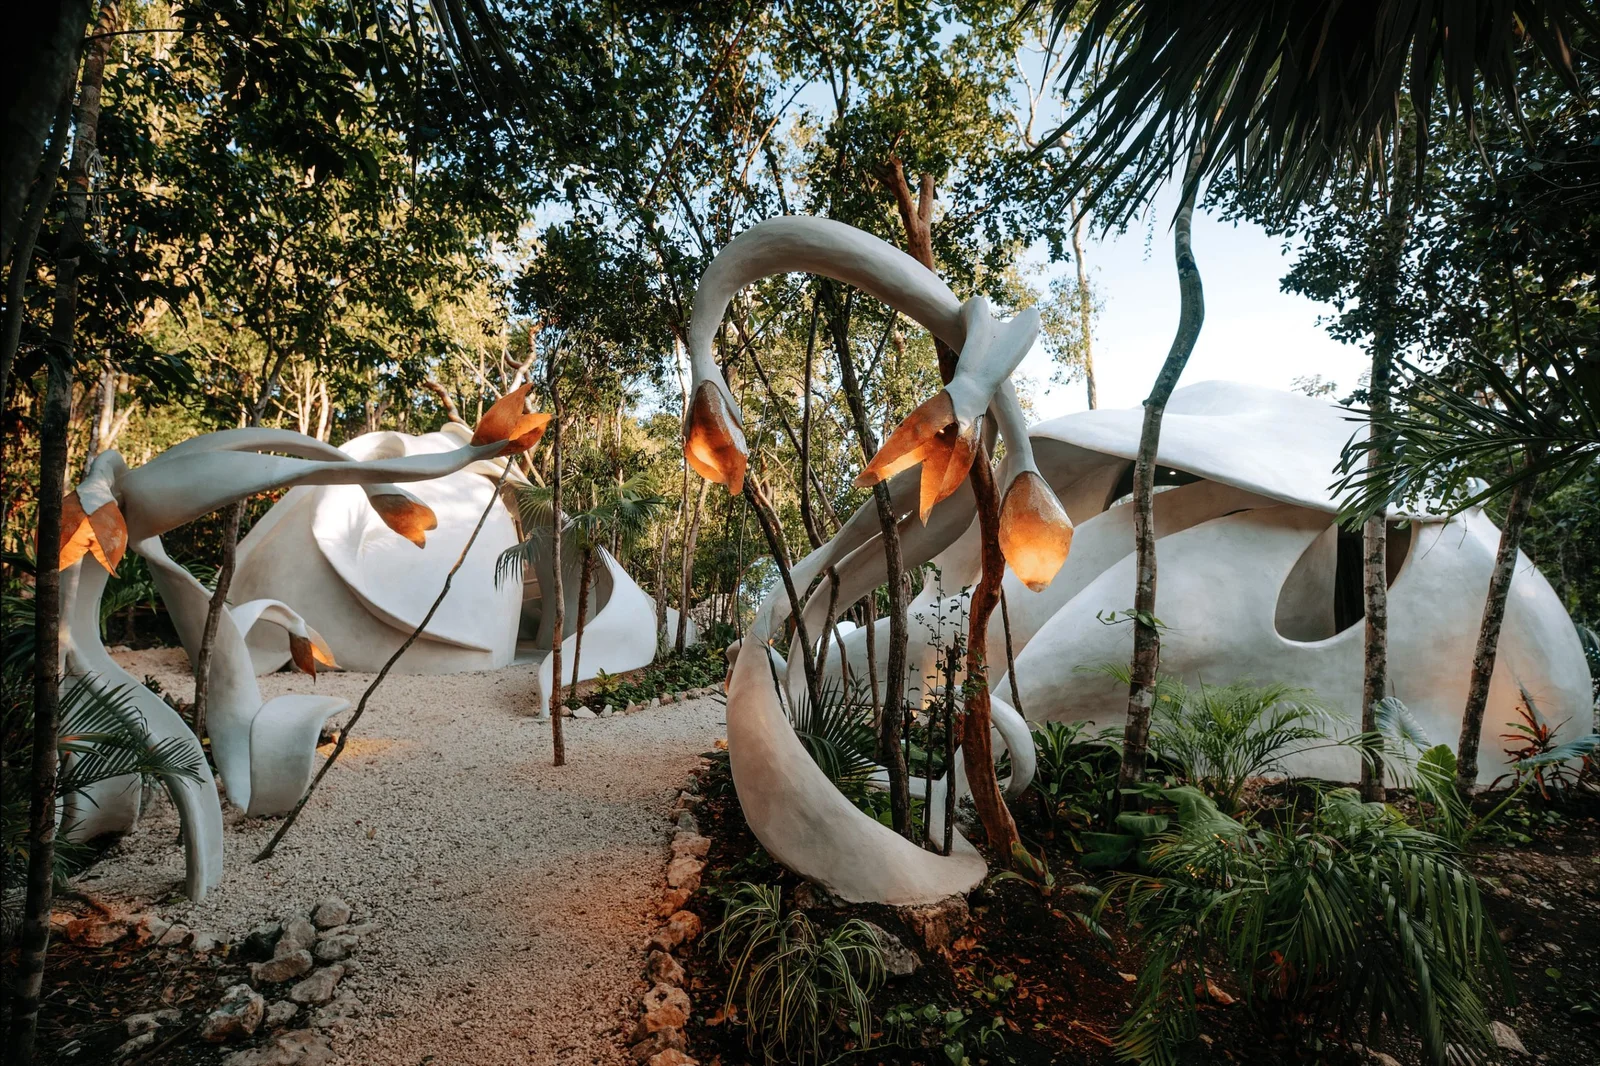 Unique sculptural white buildings with organic shapes nestled among tropical forest vegetation, giving the impression of futuristic habitation in a natural setting. Pathways are illuminated by warm-hued lanterns amid the greenery.